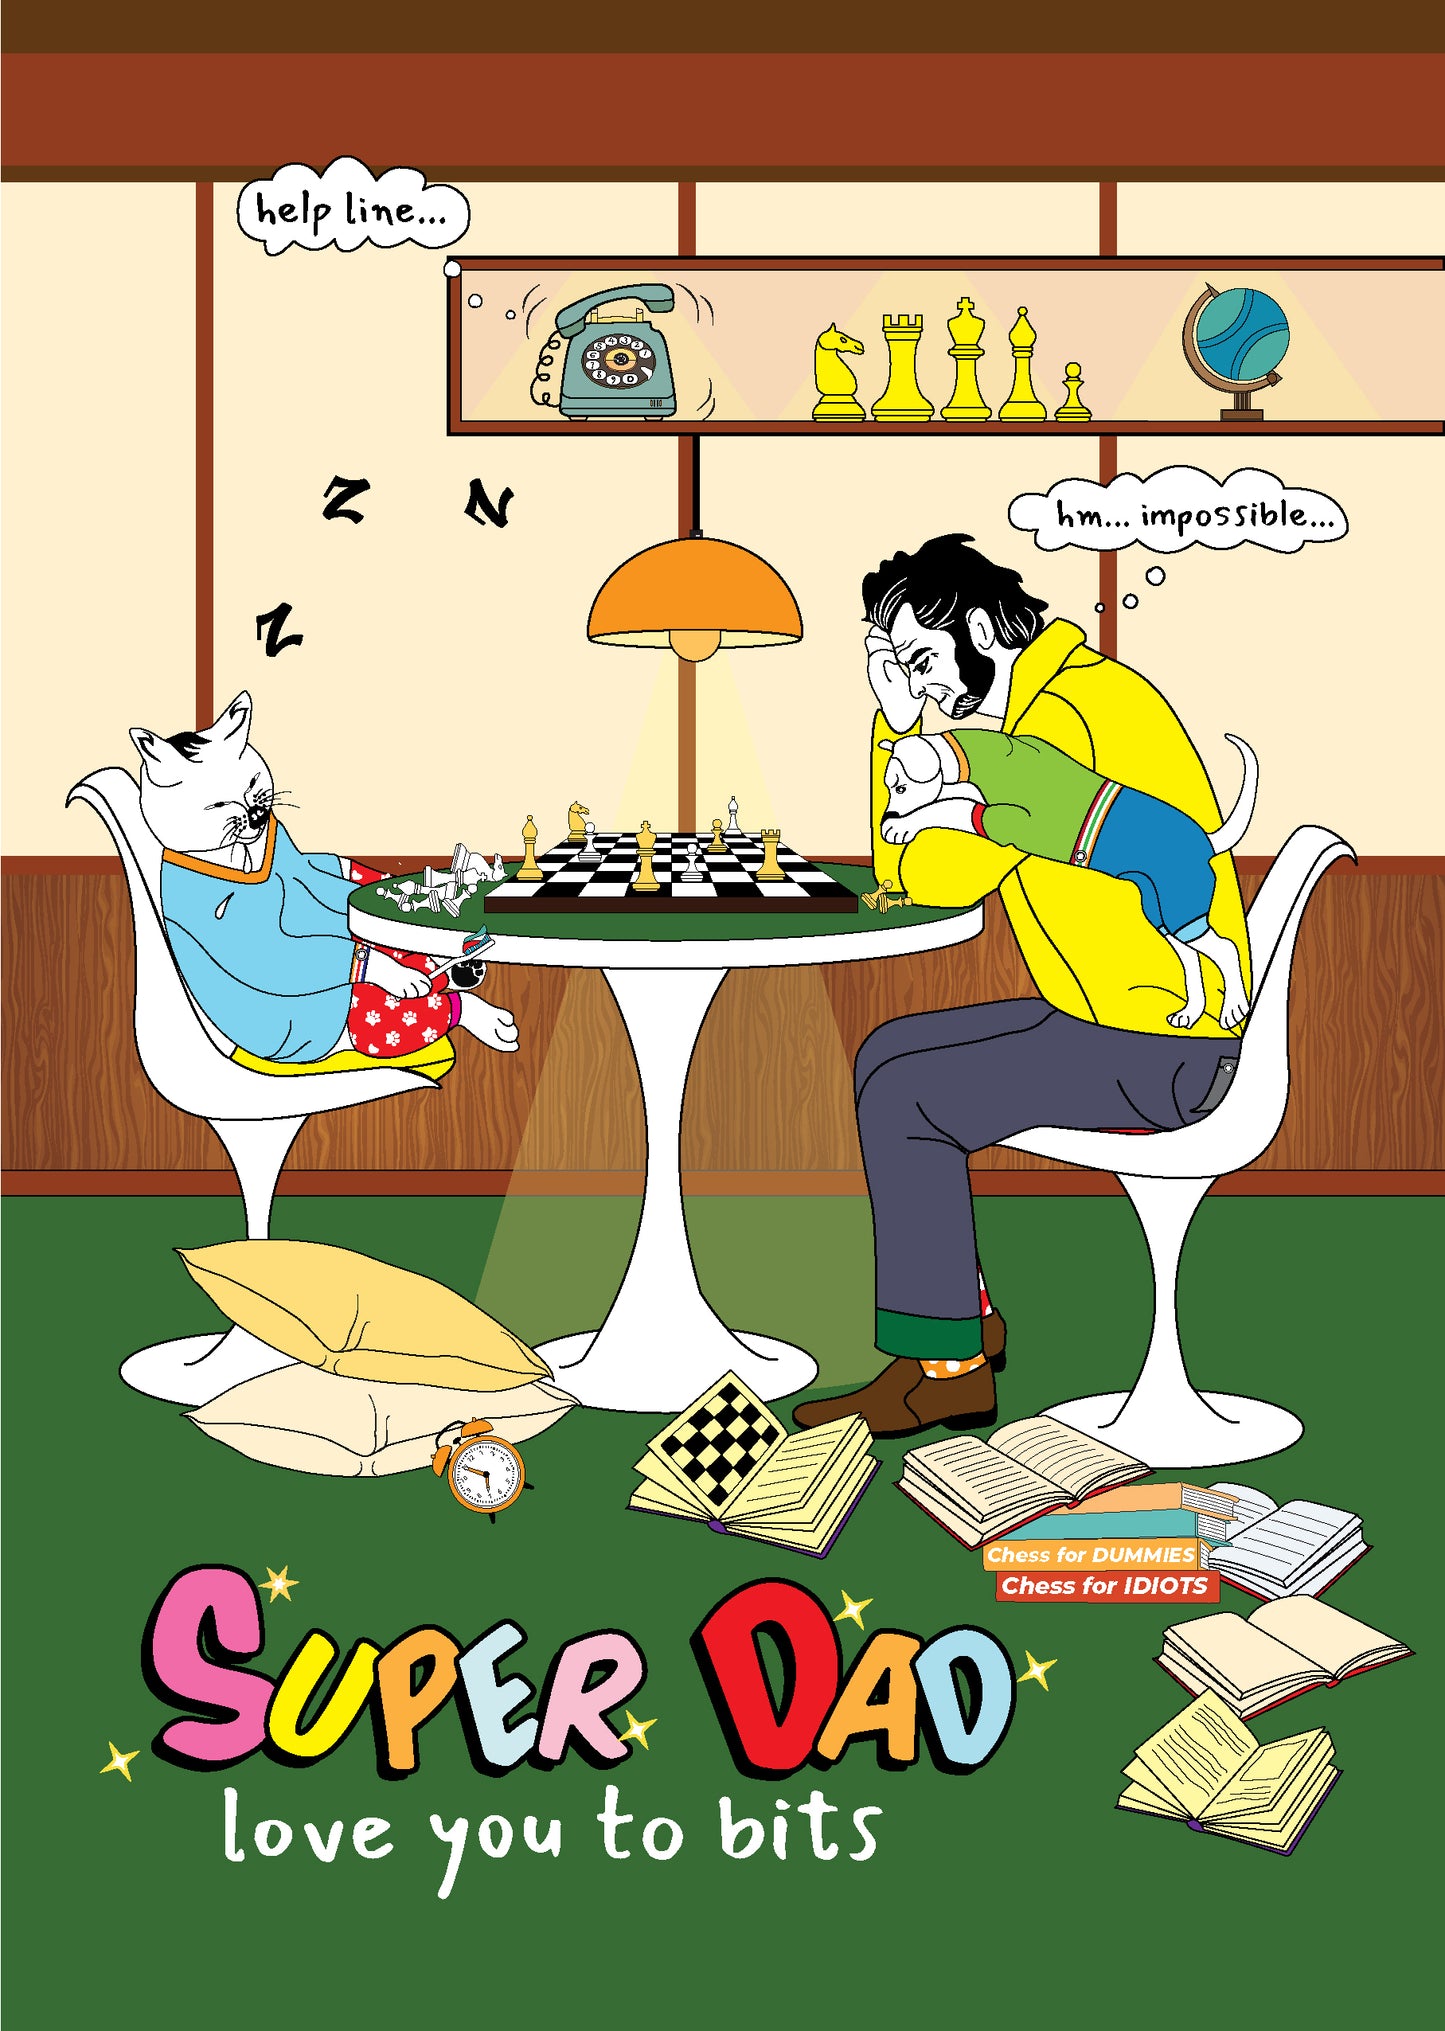 Fathers - Super Dad!